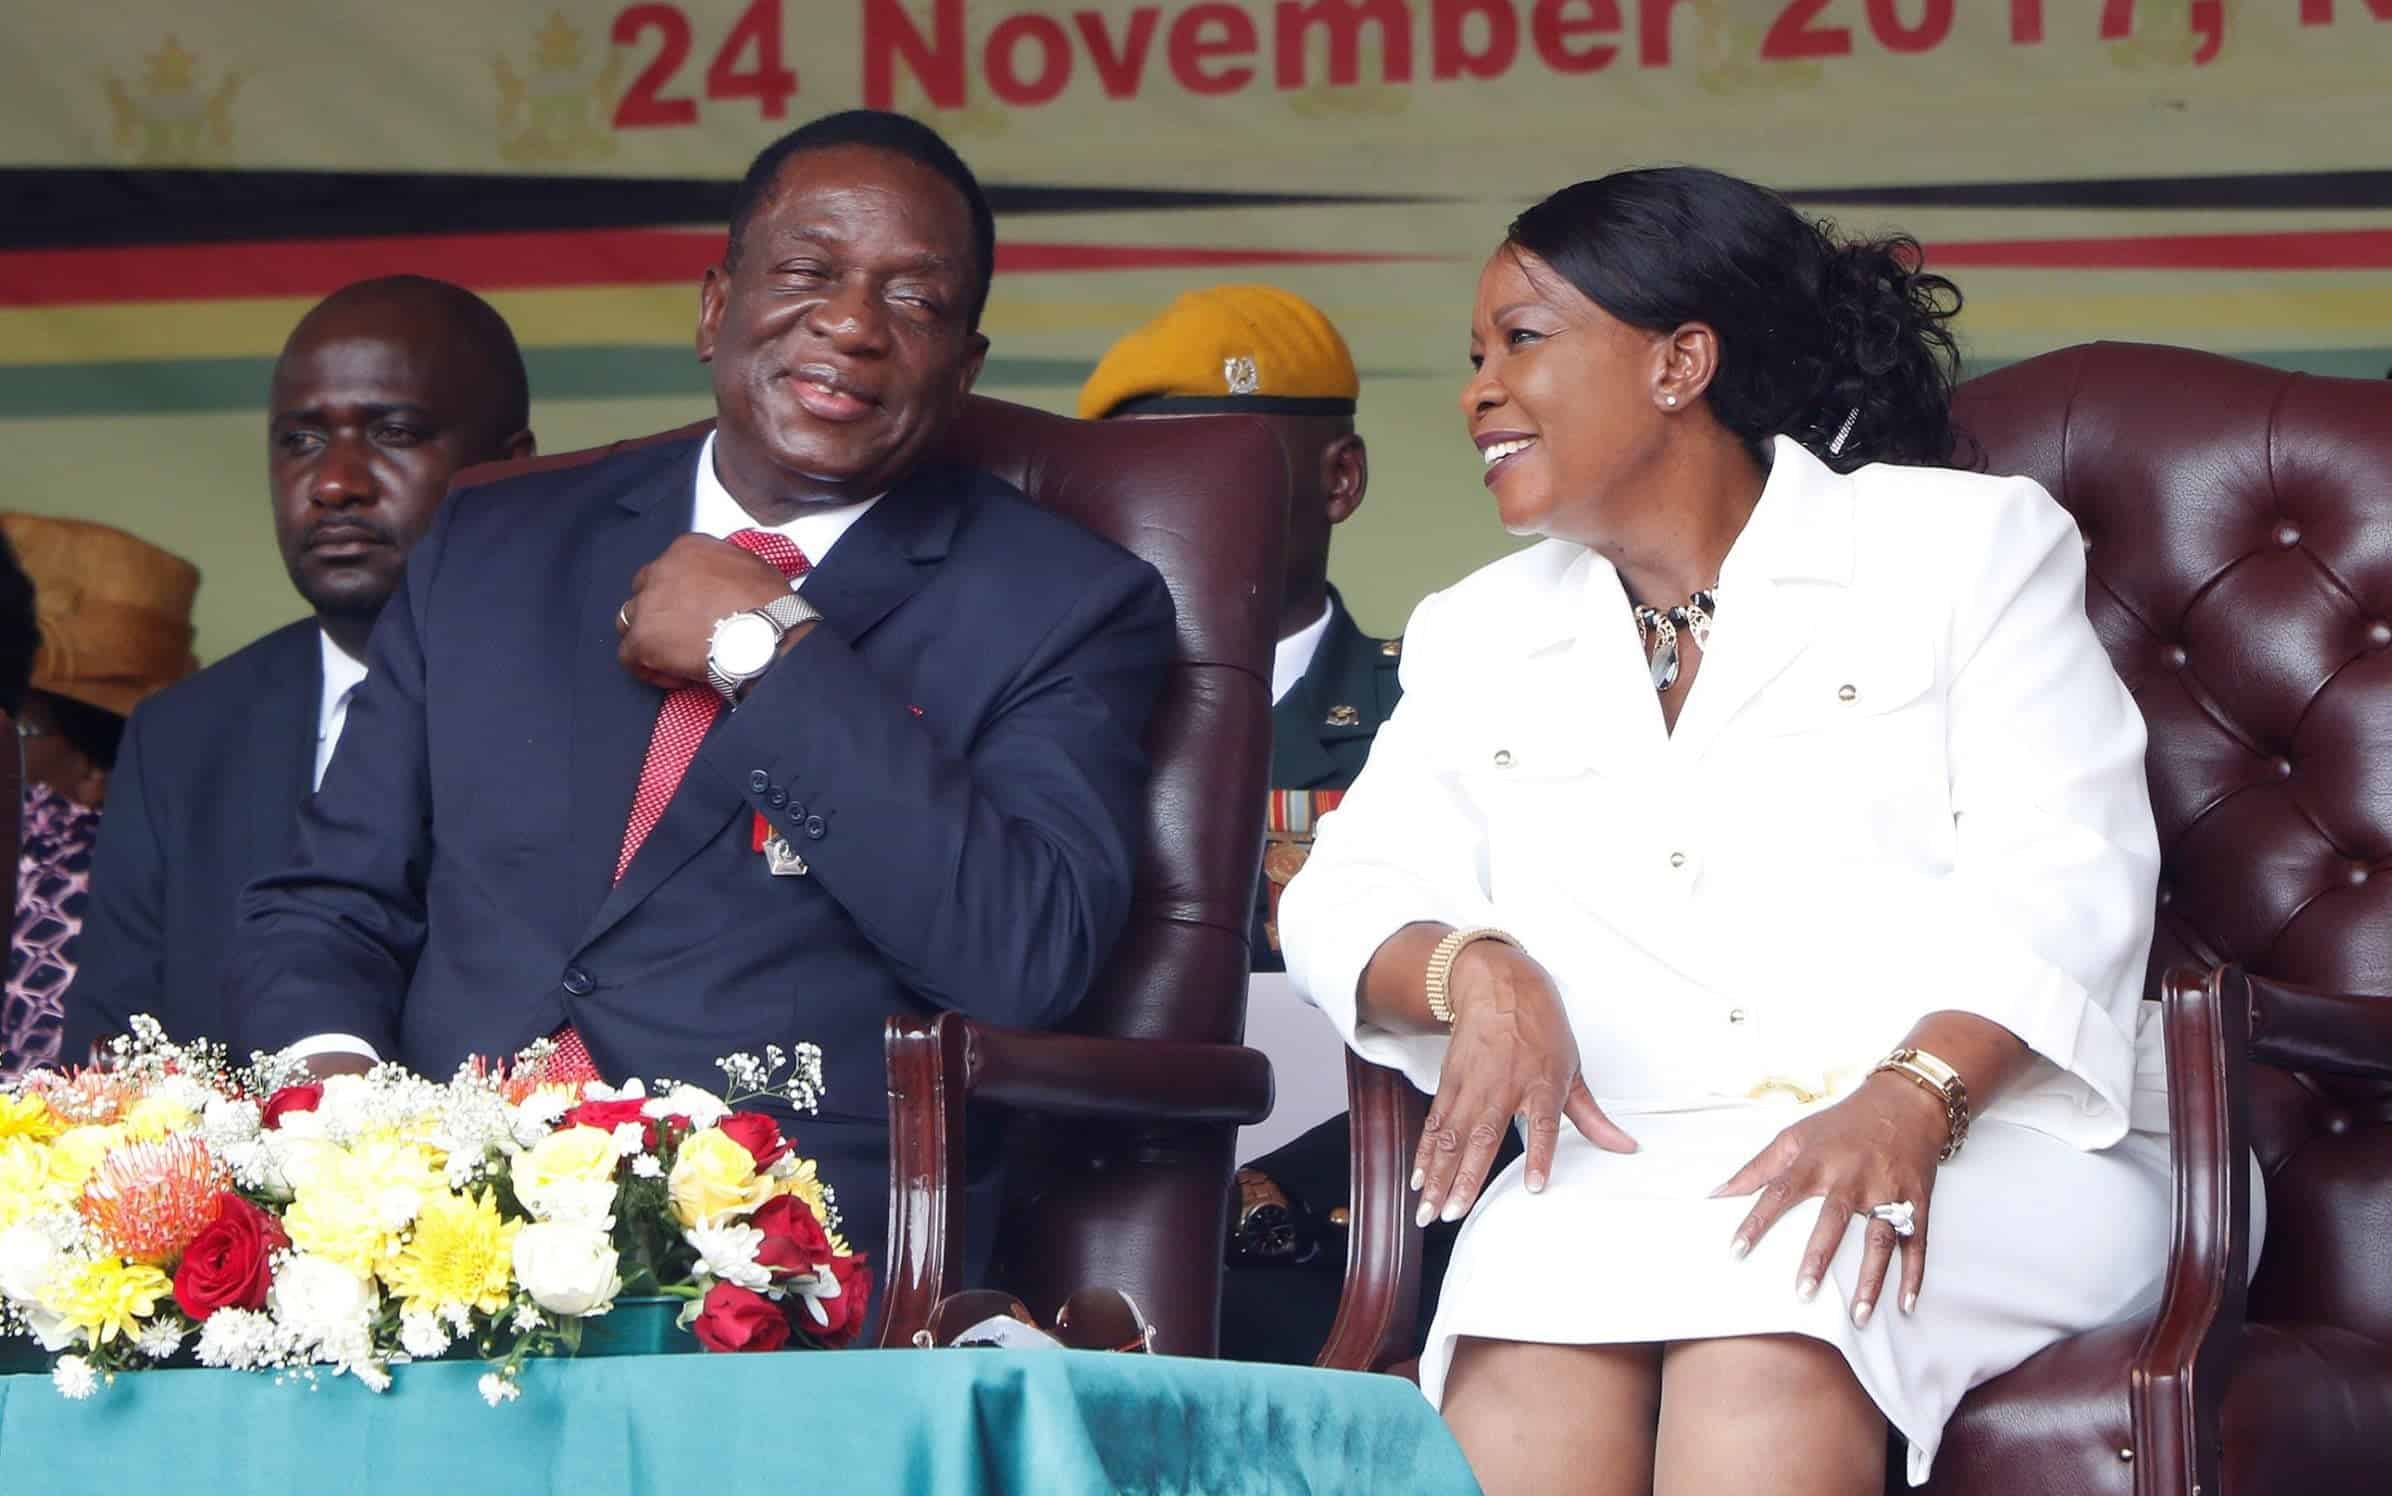 It was Chiwenga who gave my wife the medal, not me- implies Mnangagwa